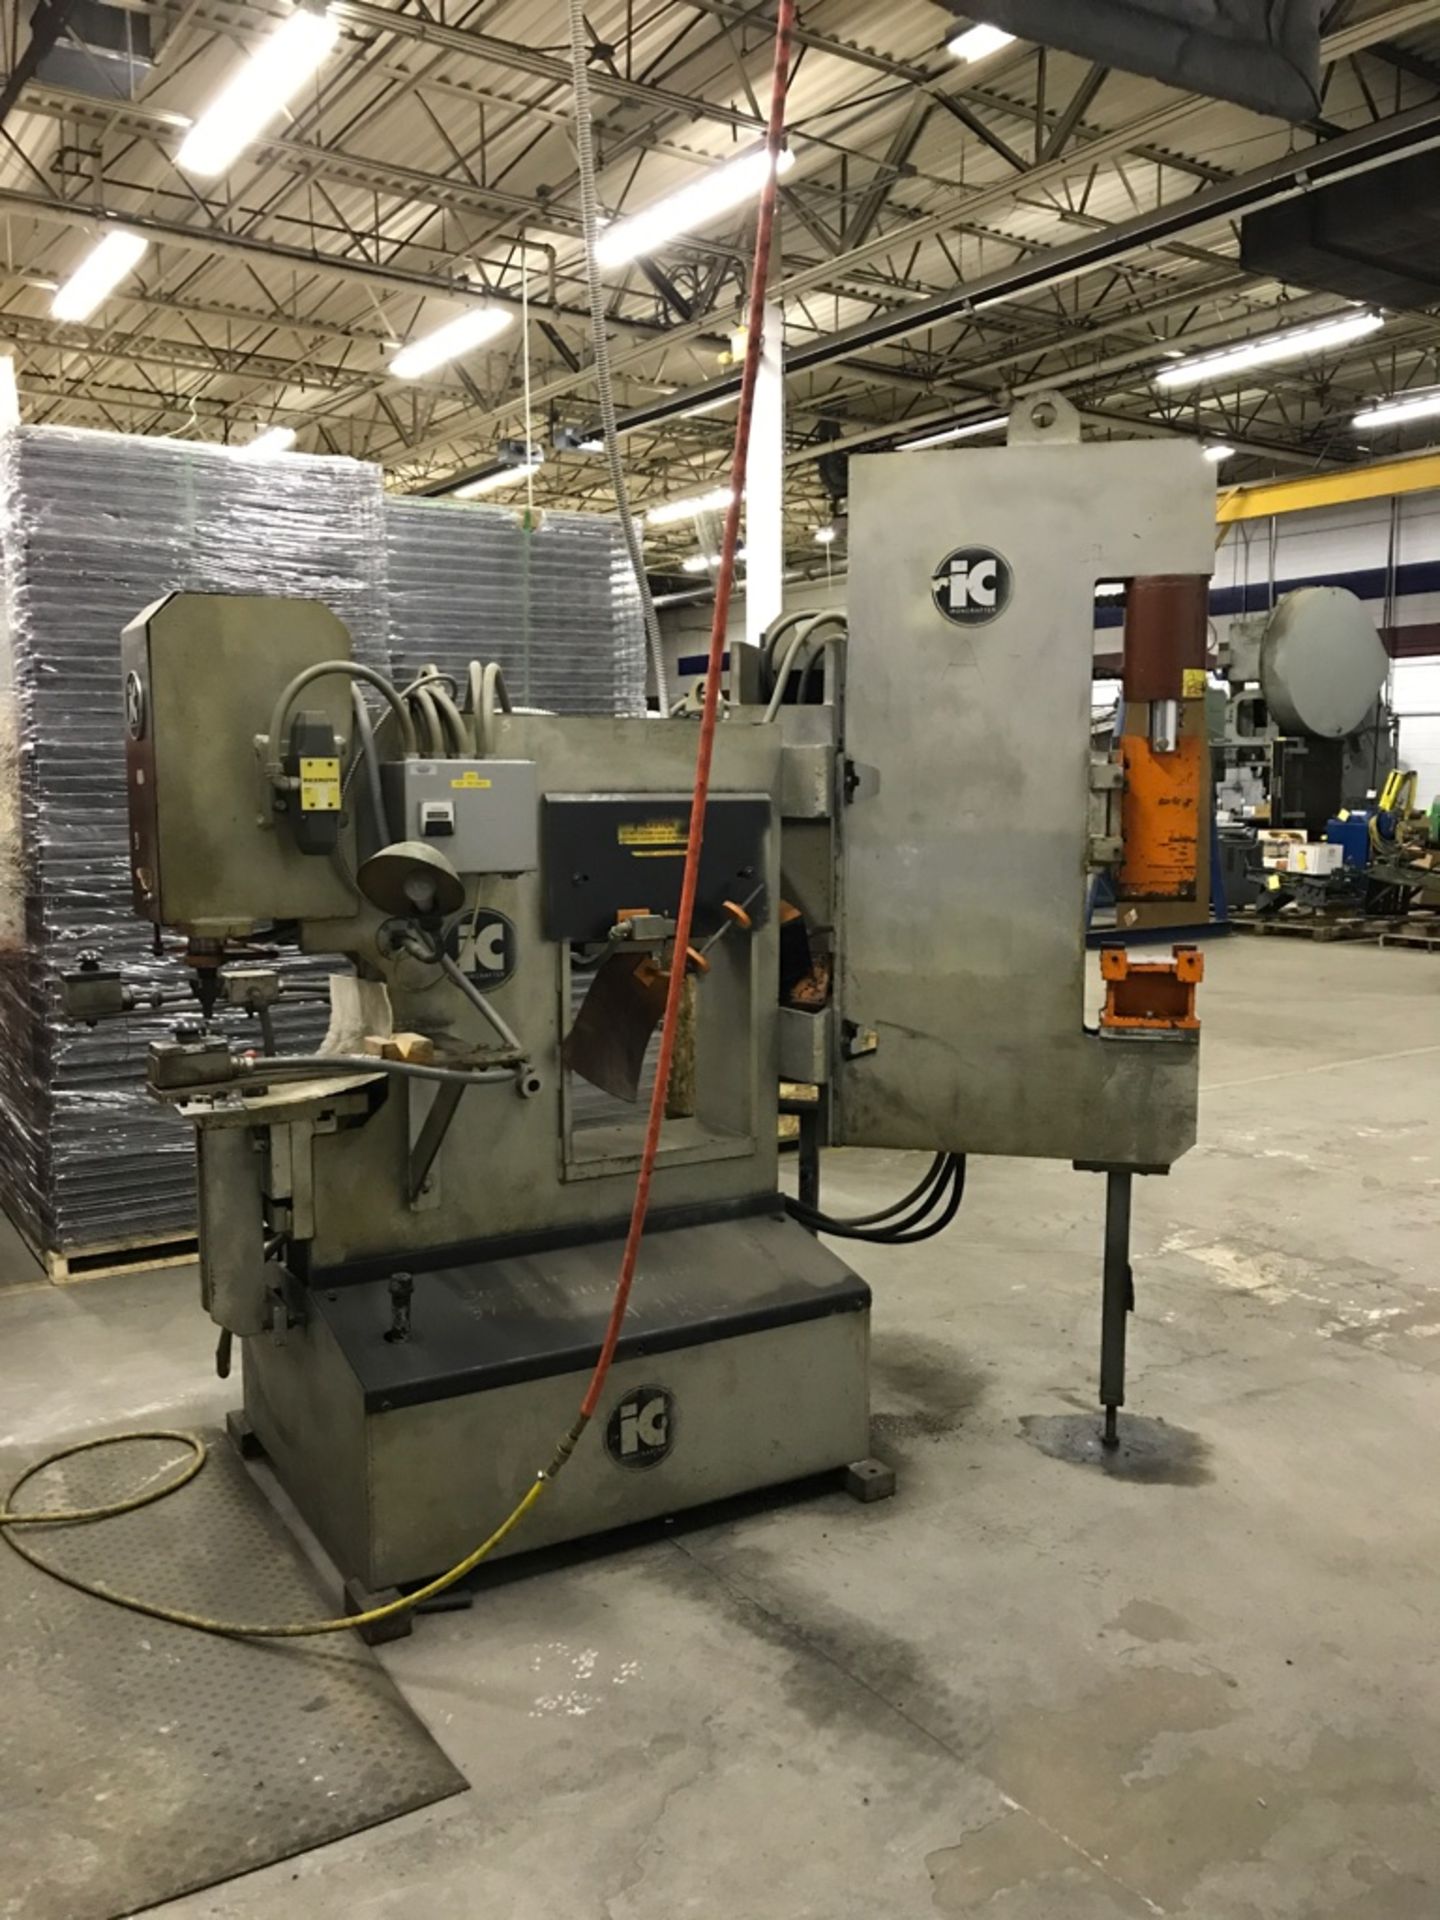 70 Ton Ironcrafter Ironworker, Model HMW70-70, 70 Ton Punch Station, 15" Throat, 4" Stroke, 70 Ton - Image 5 of 5